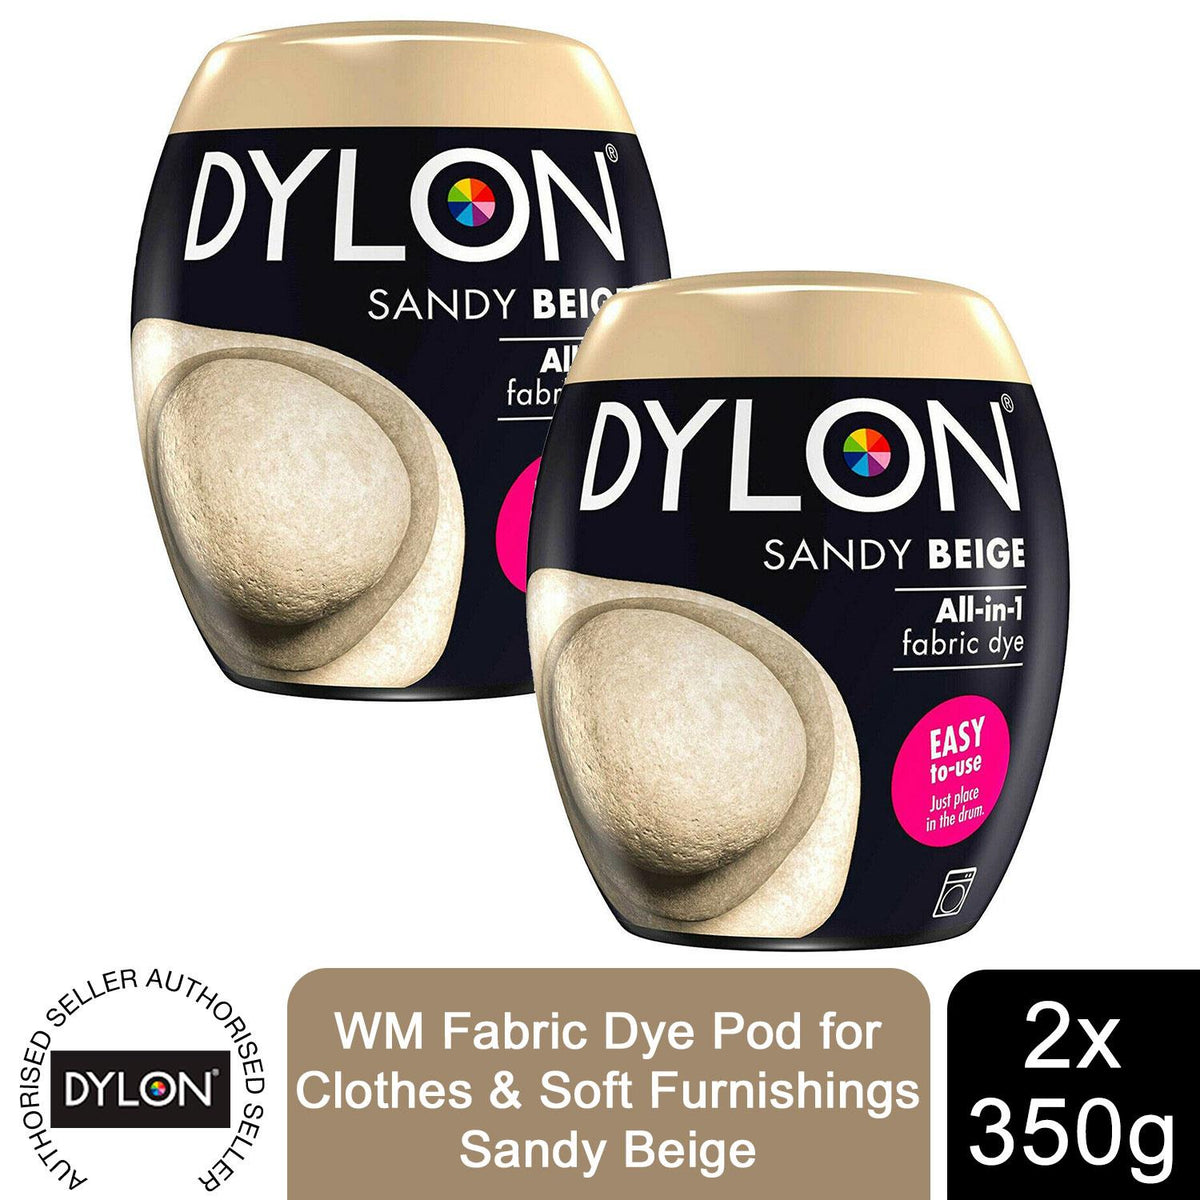 Dylon Wash and Dye, Fabric Dye for Clothes & Soft Furnishings